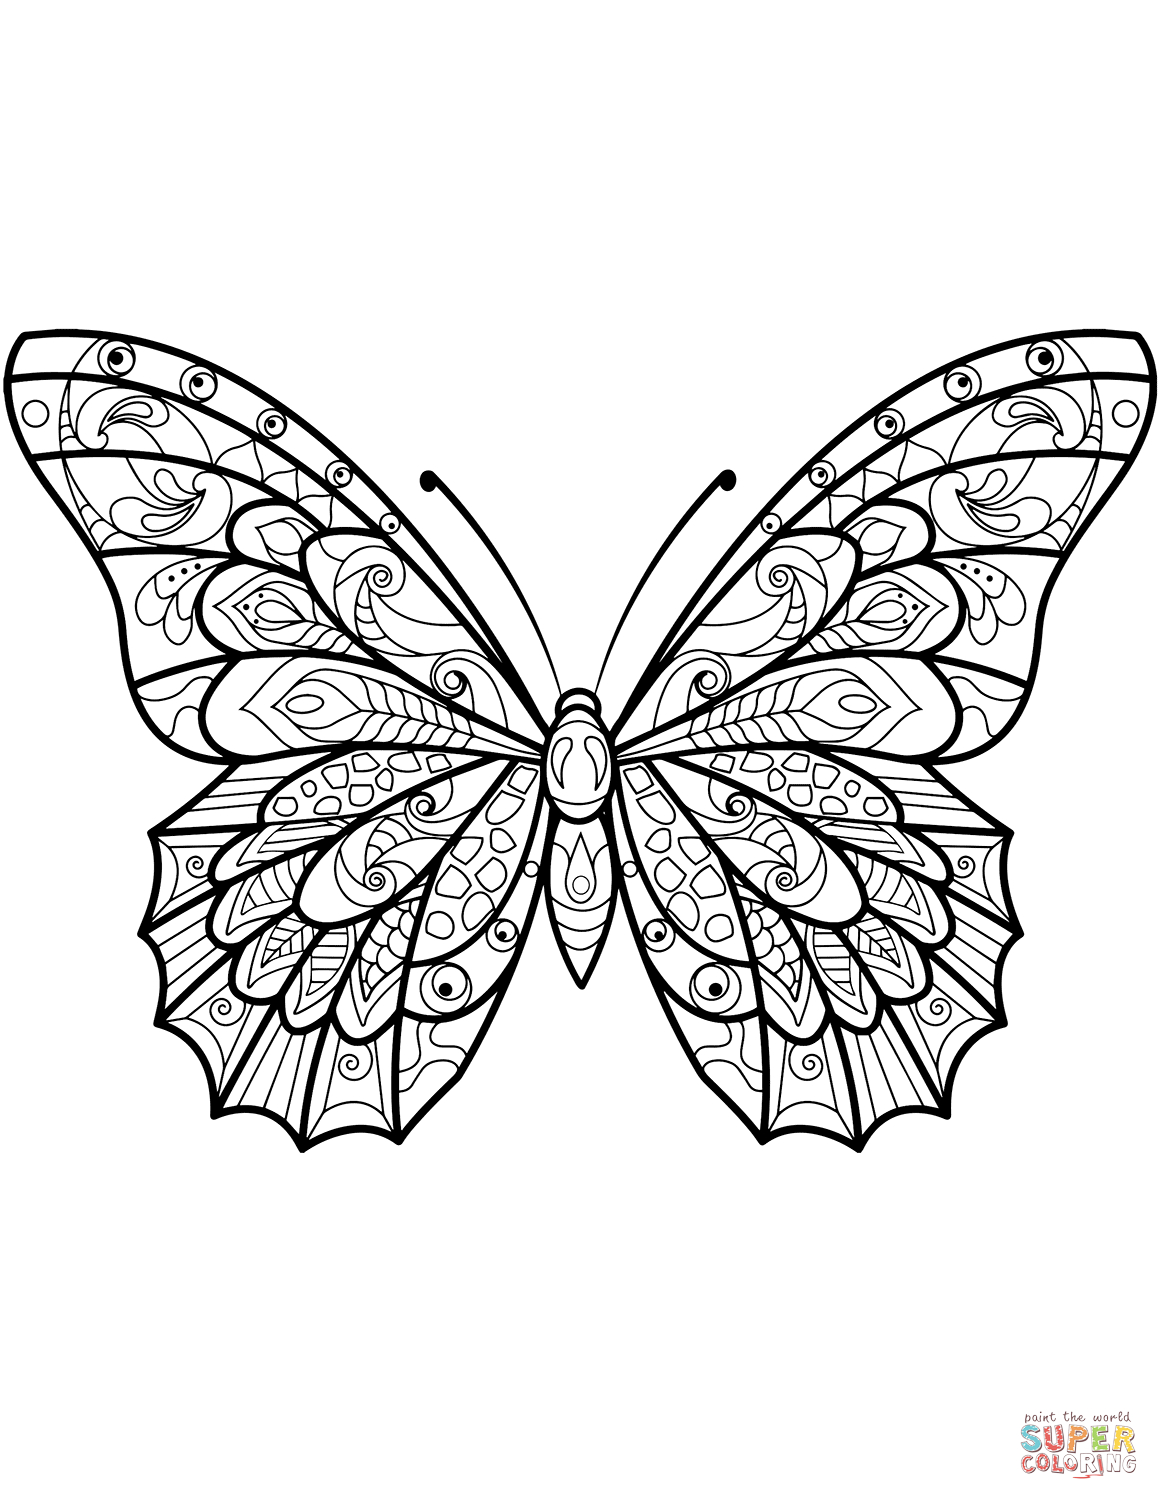 Zentangle Butterfly Coloring Page | Free Printable Coloring